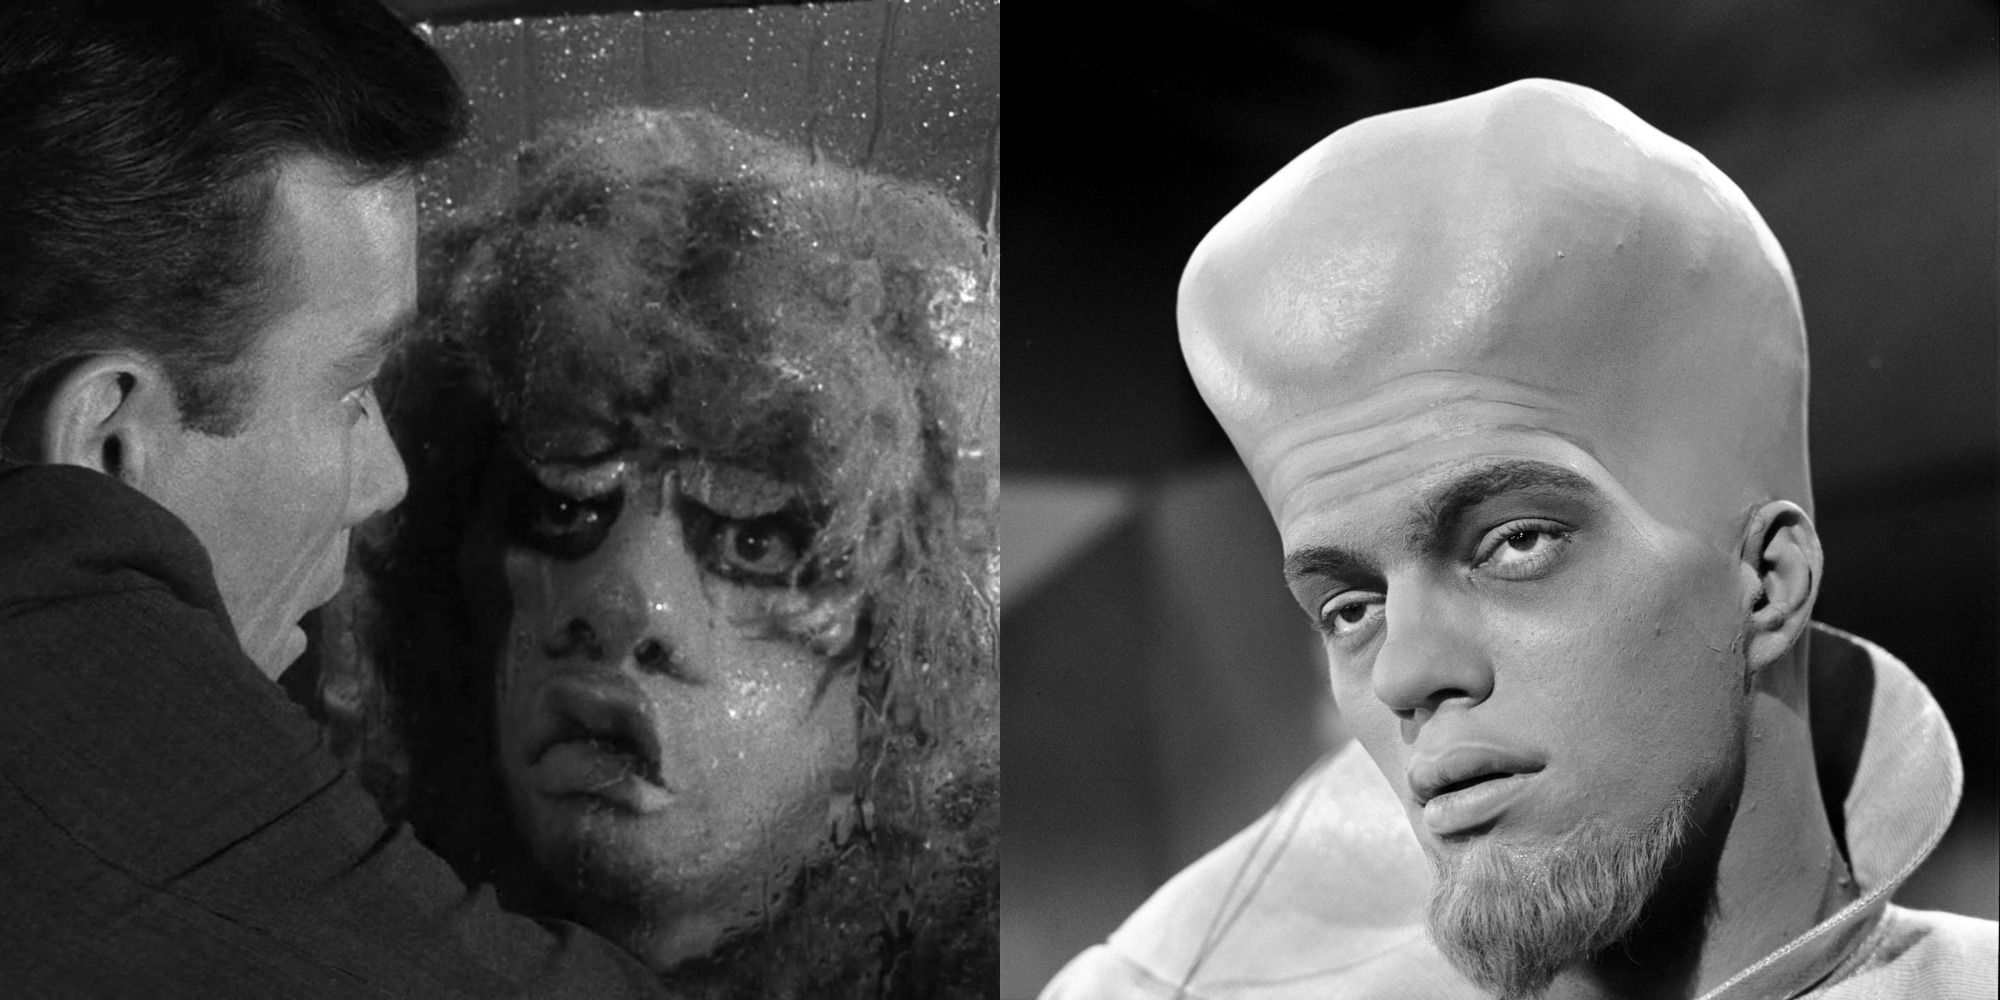 Split image showing the gremlin and a Kanamit in The Twilight Zone